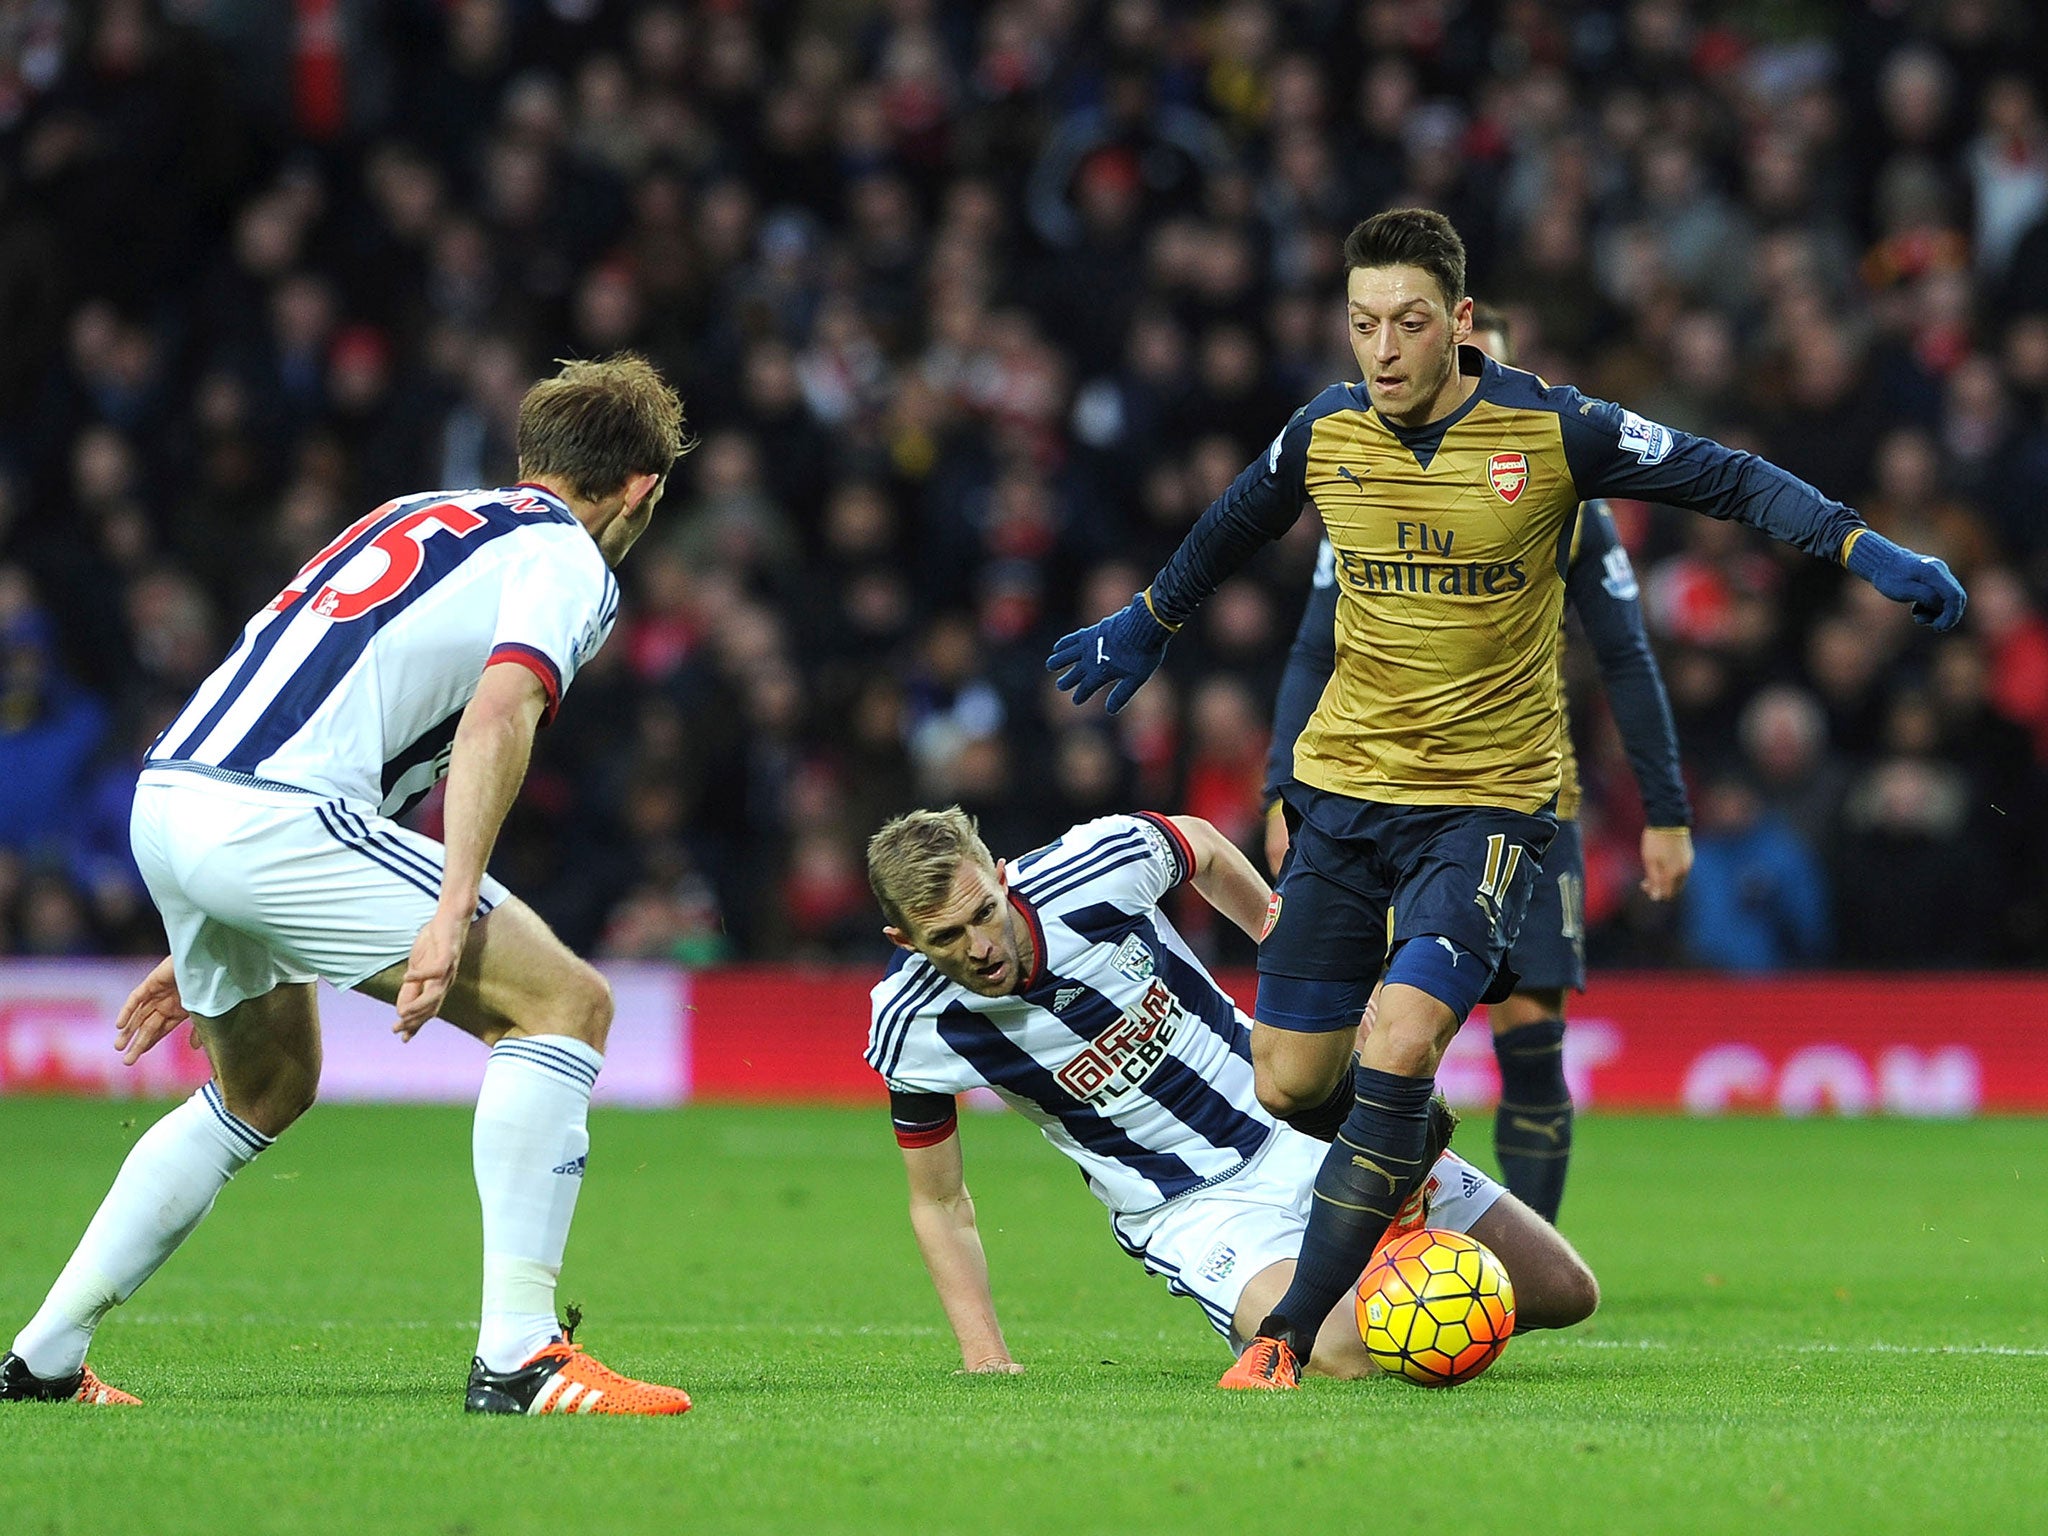 Mesut Ozil registered an assist for the seventh straight match in the Premier League